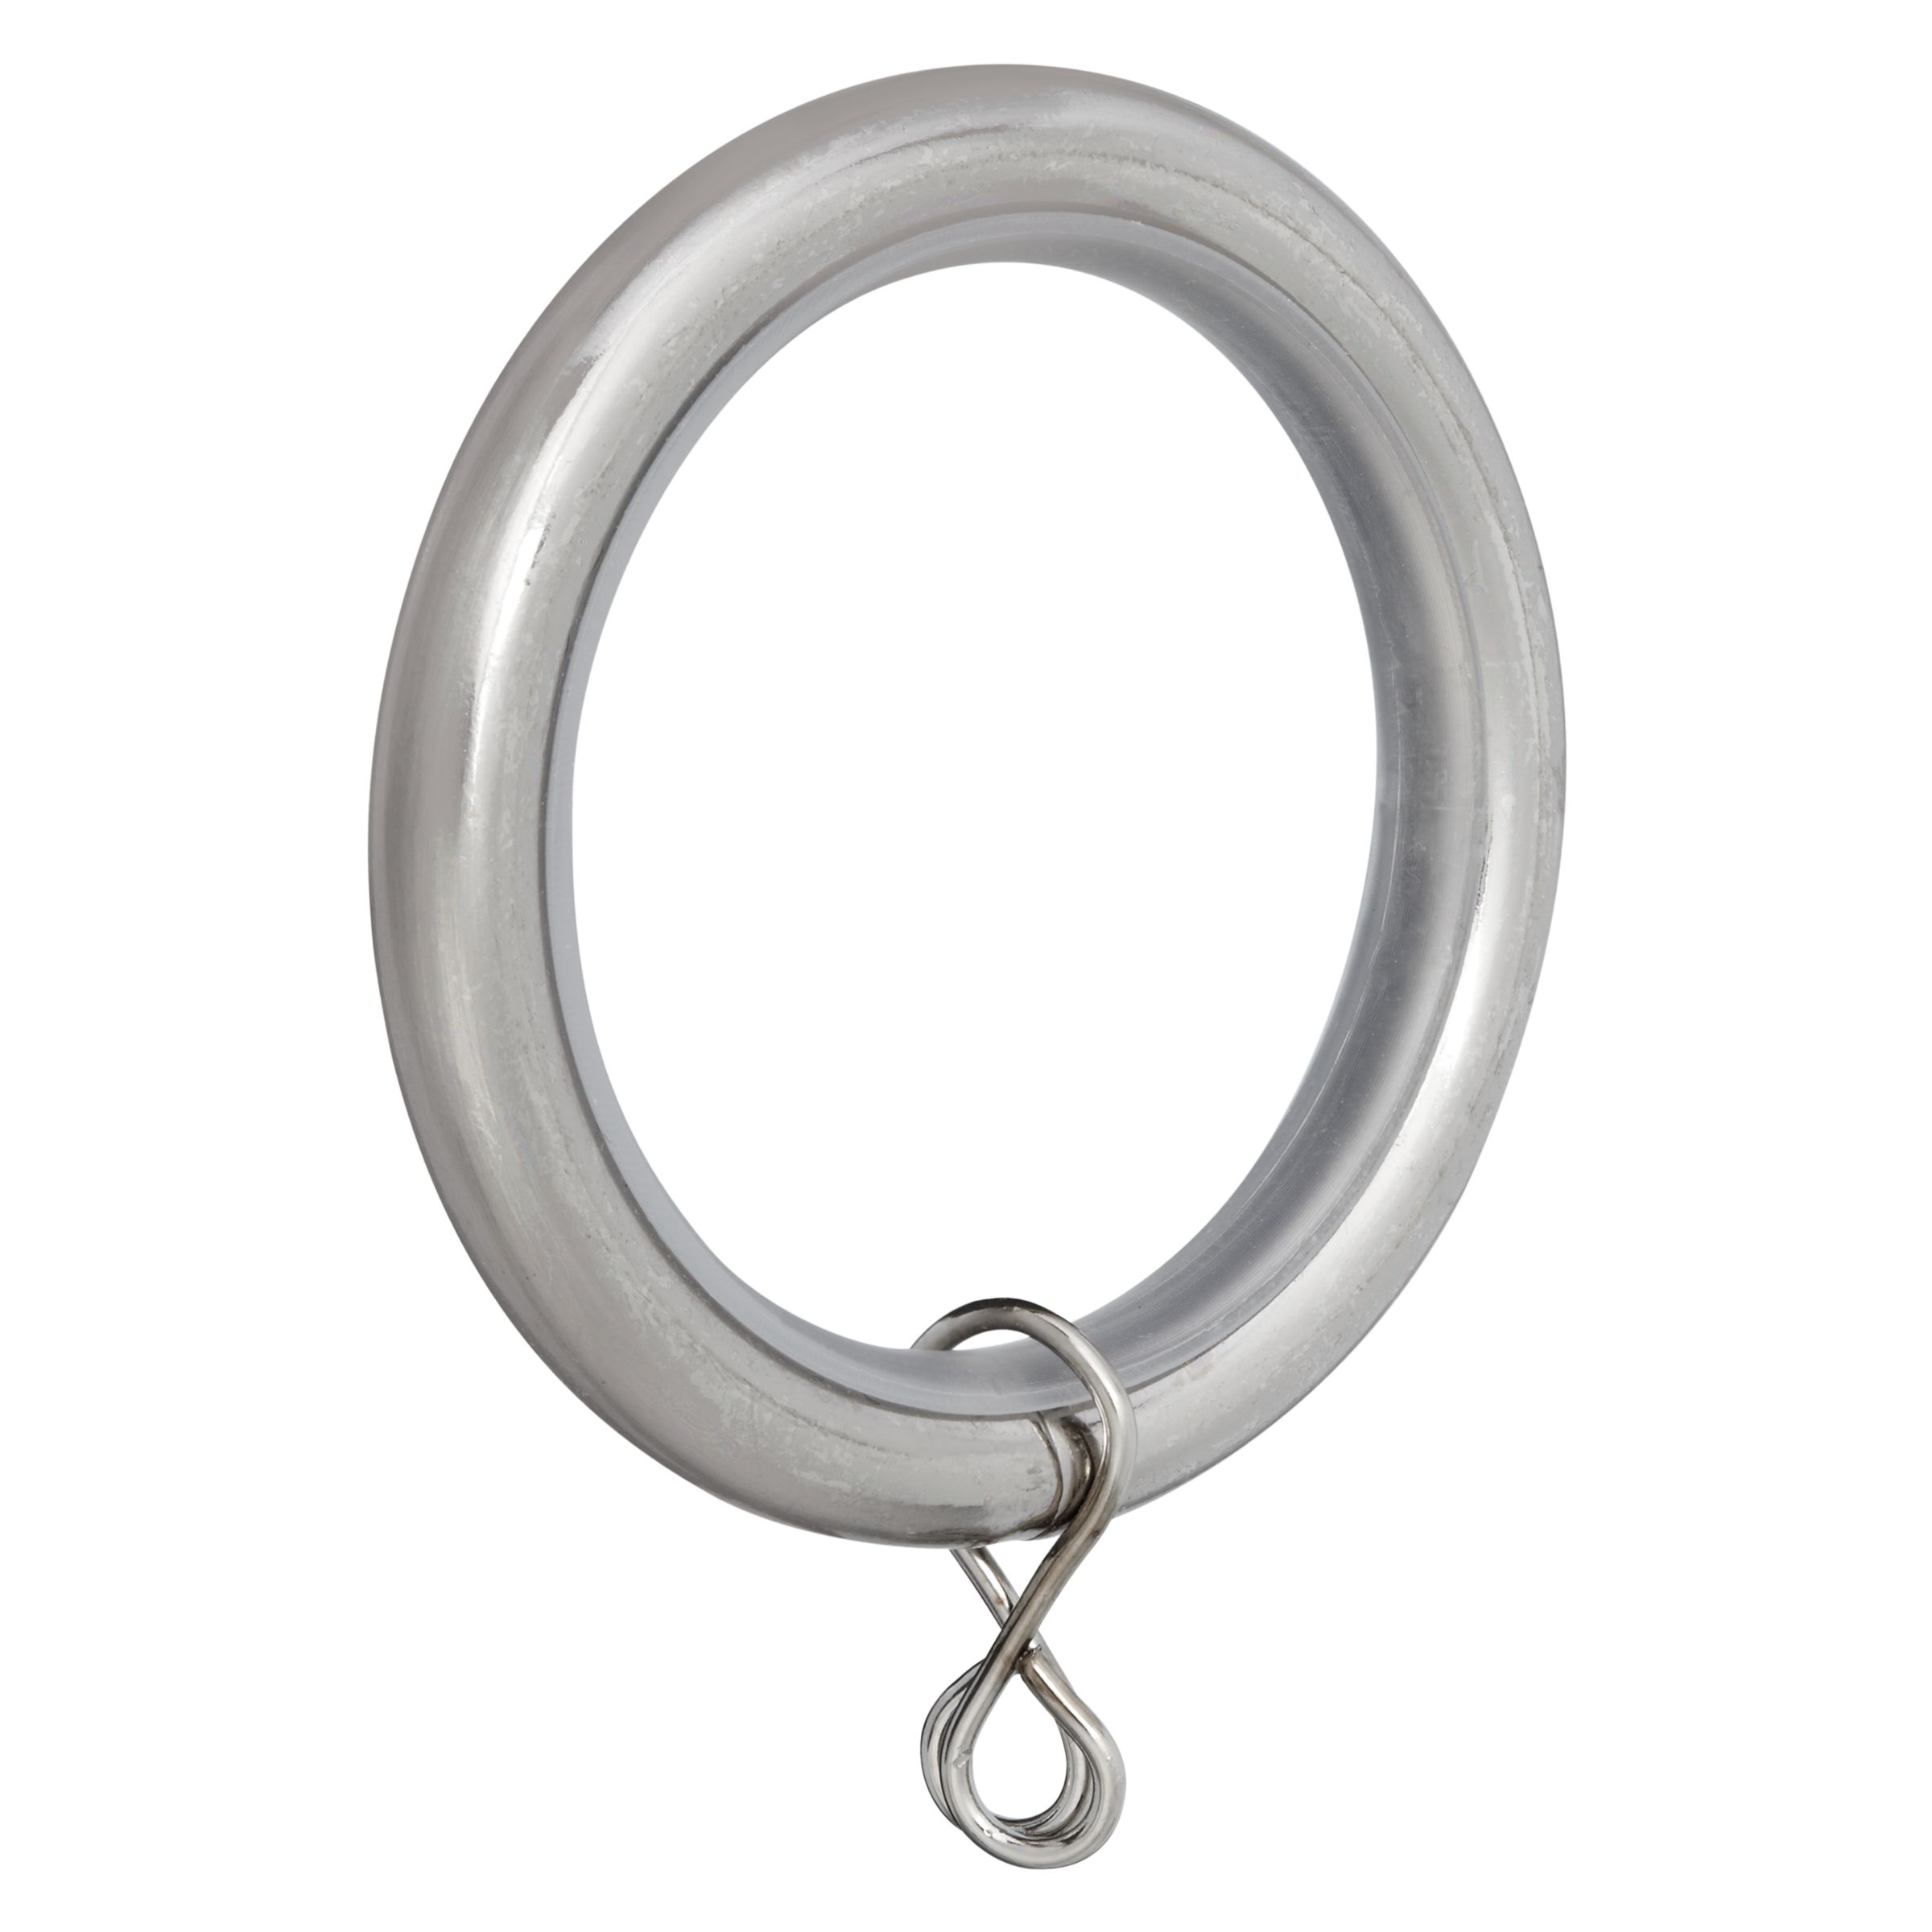 John Lewis & Partners Extendable Curtain Rings, Pack of 6, Dia.25/28mm